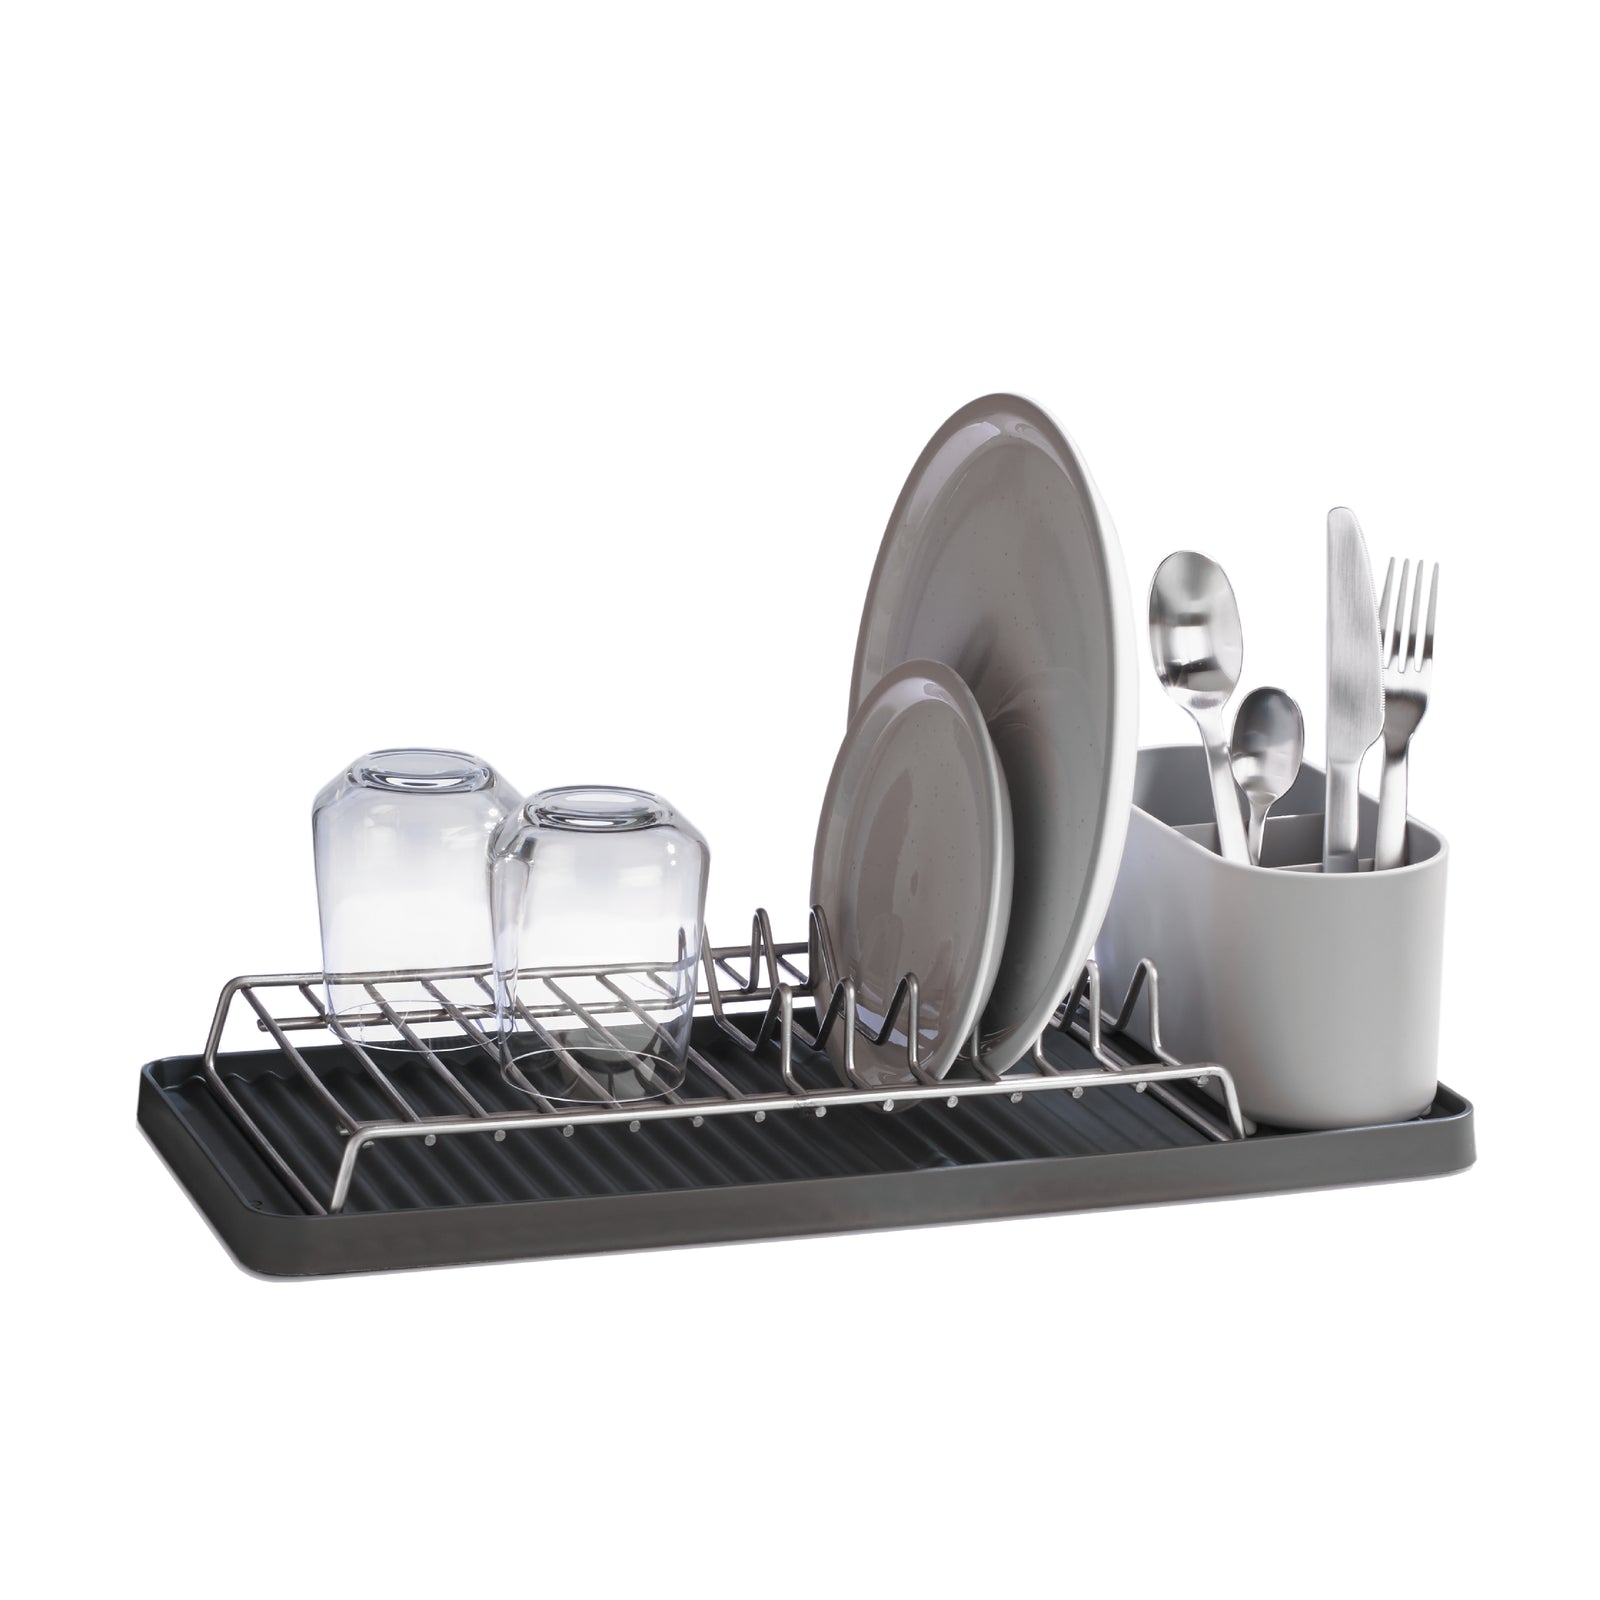 ReBorn Recycled Compact Draining Rack - Dark Grey Kitchen Dish Drainer - Made in the UK